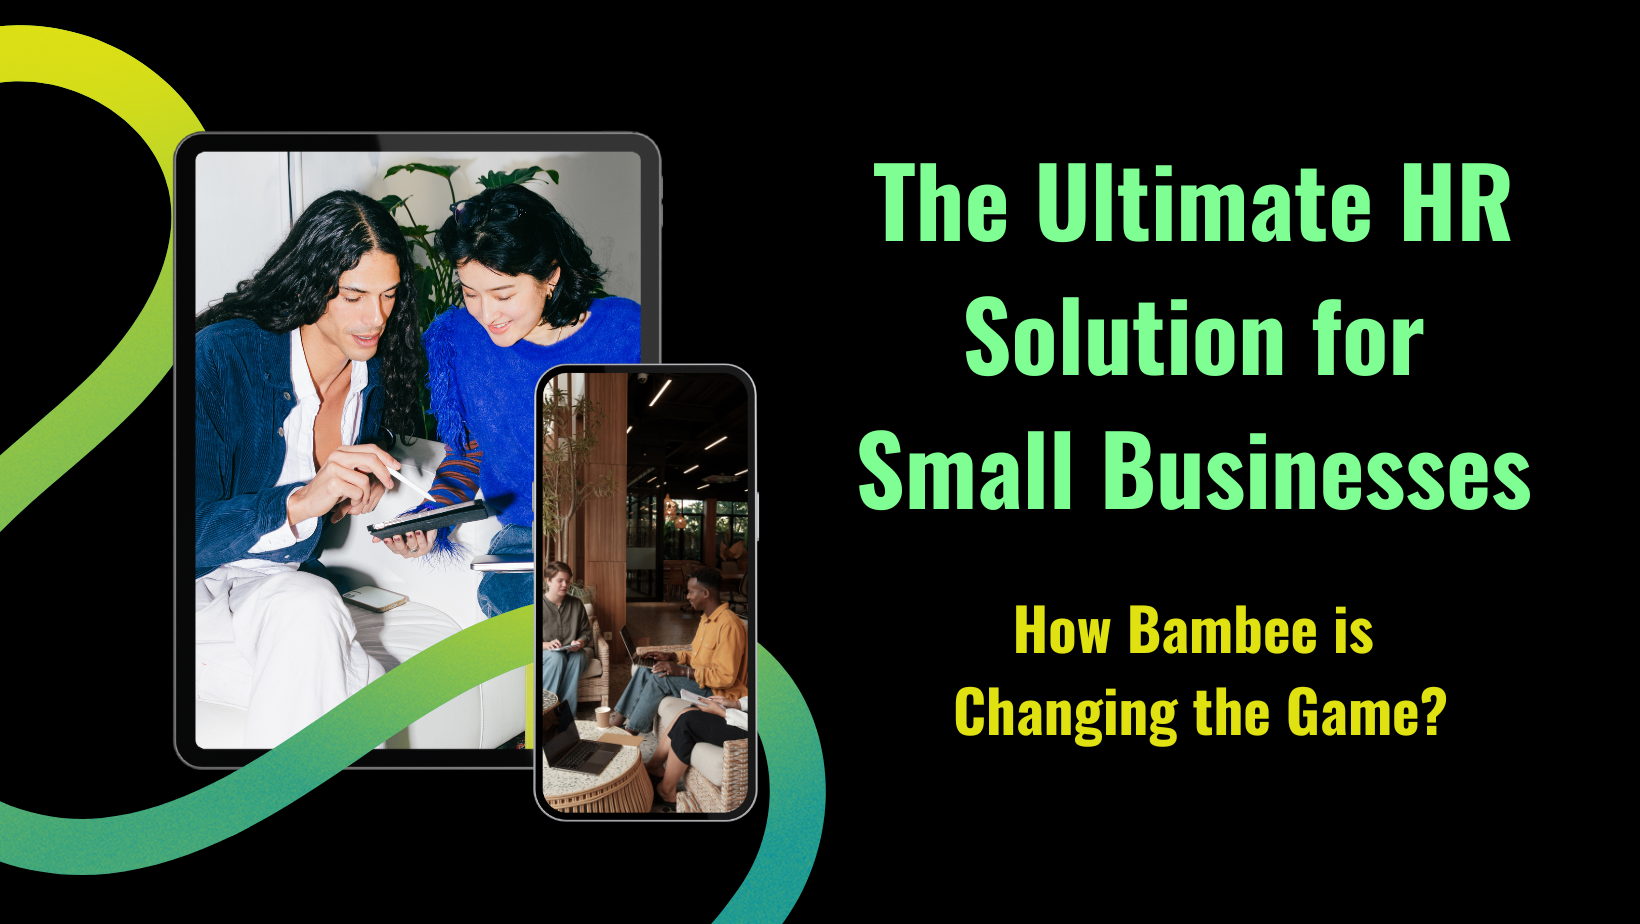 The Ultimate HR Solution for Small Businesses: How Bambee is Changing the Game? – SmallBiz Tools Hub